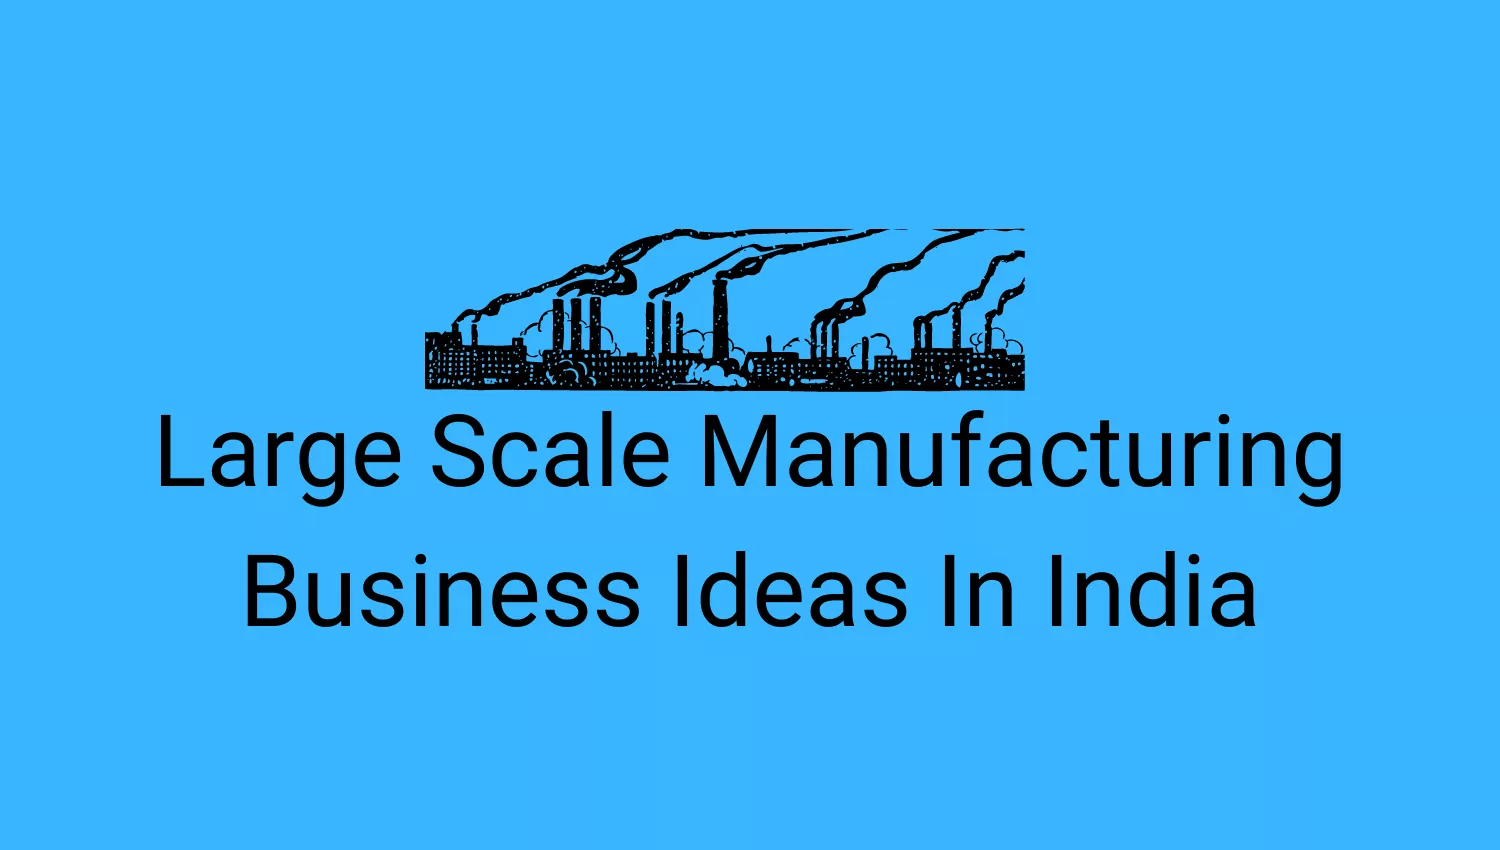 Large Scale Manufacturing Business Ideas In India